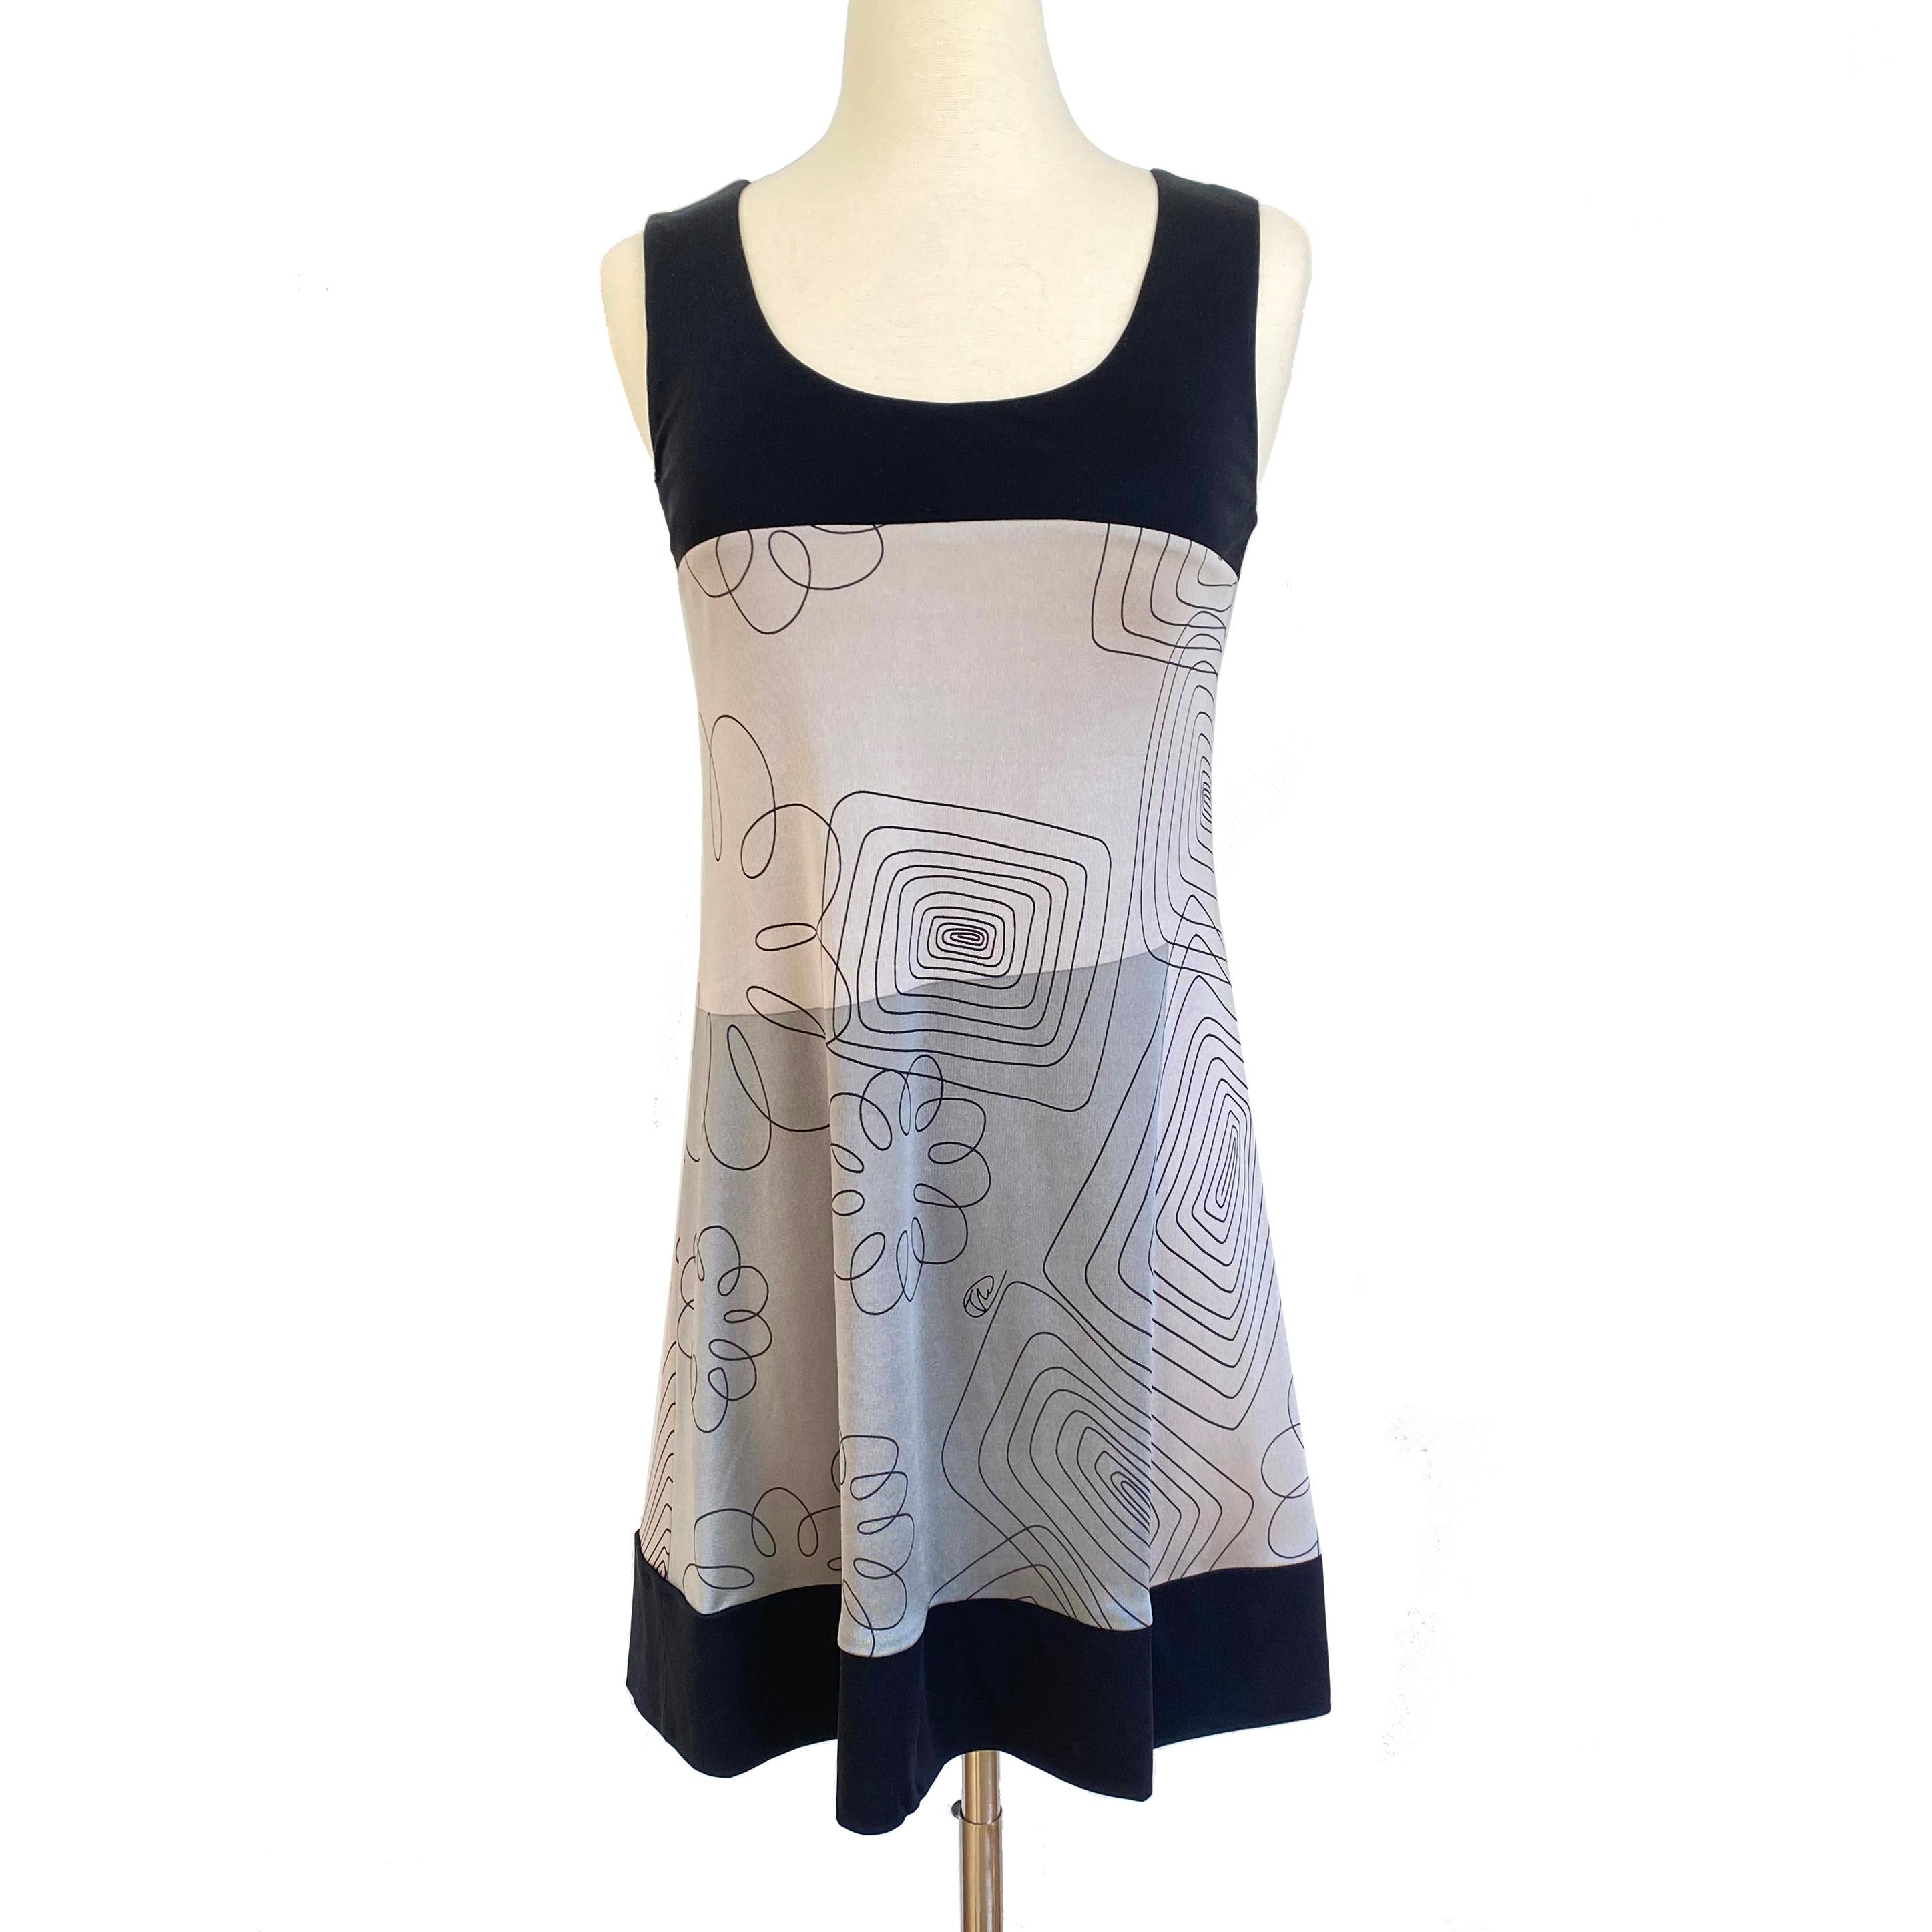 Minimalist chic modern tank shift dress.
Original freehand signed scribble print from Flora Kung.
Approximately 34